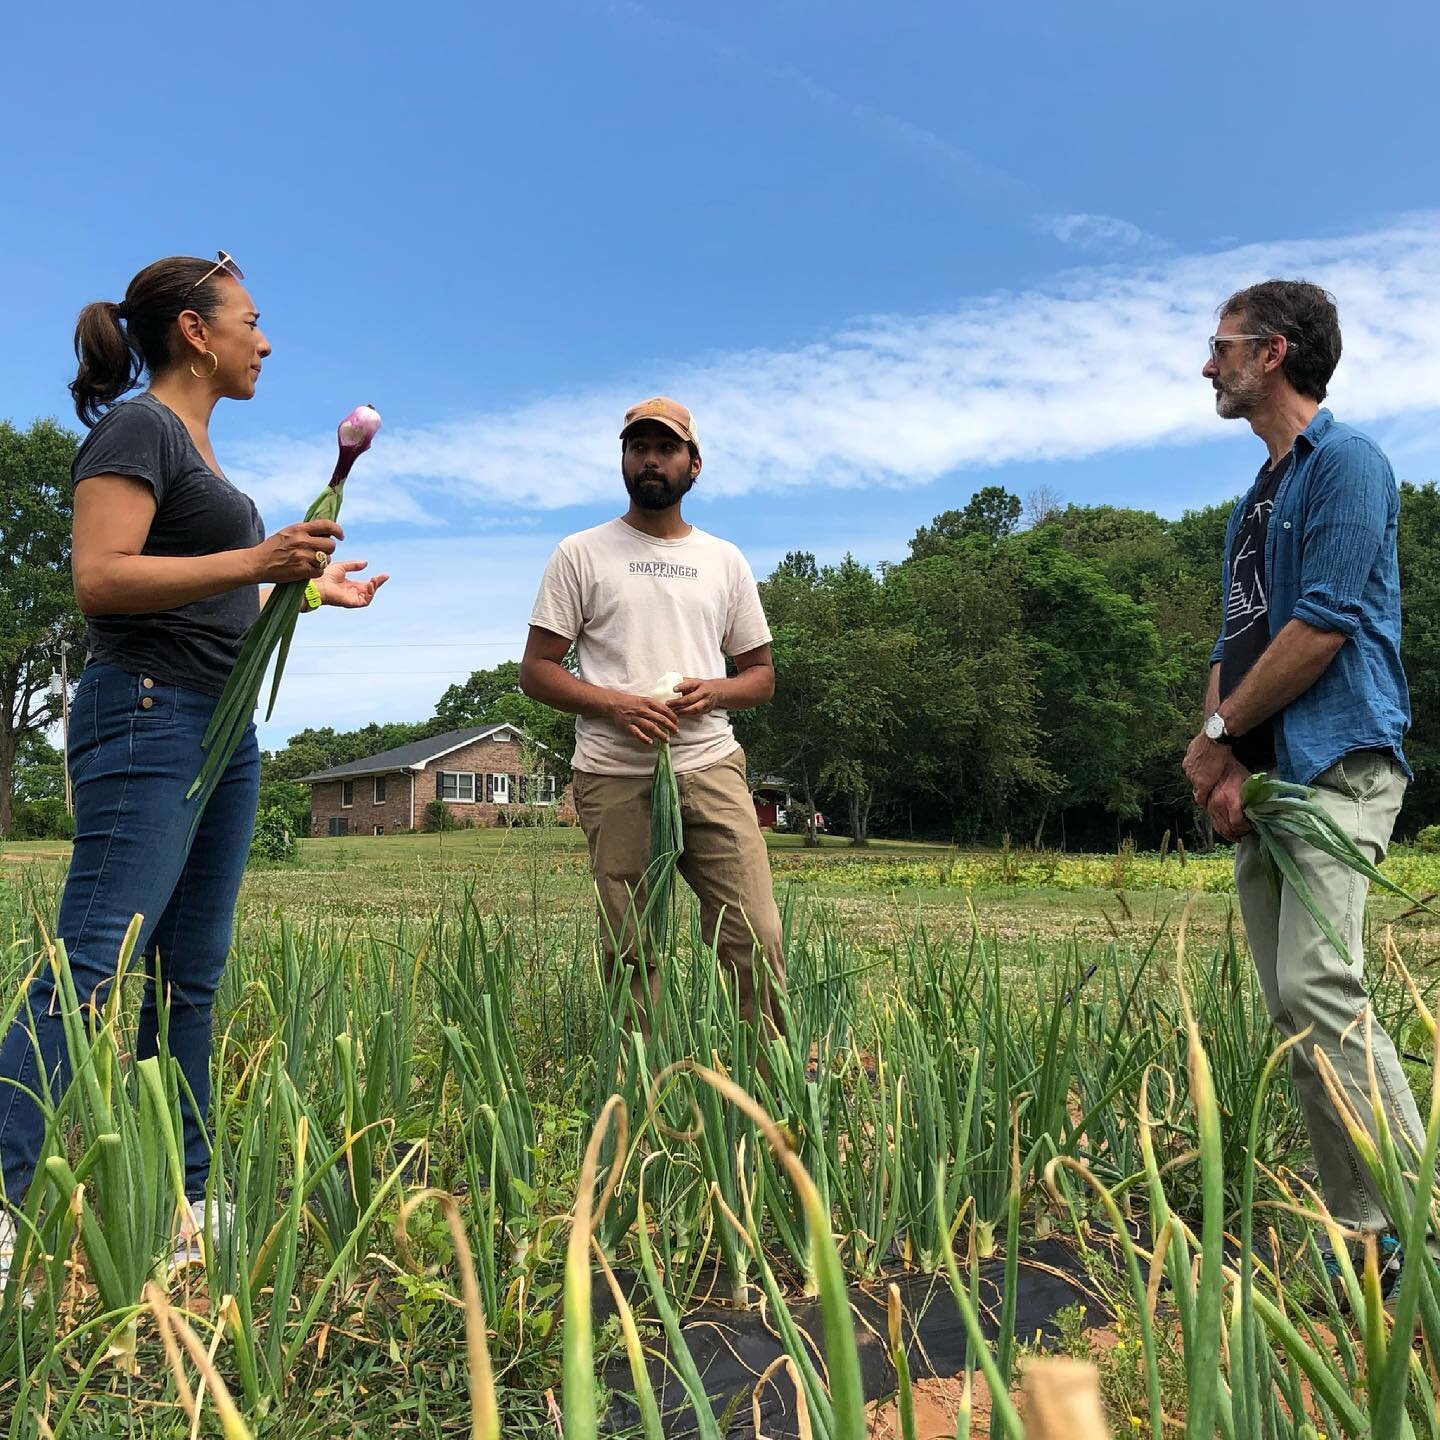 #FARMLIFE: When a #JamesBeard Award winning chef takes you to the &ldquo;Root of it All&rdquo;. Chef Steven Satterfield took me to @snapfingerfarm to meet farmer Rahul Anand, one of many growers who bring fresh, organic produce to the tables at @mill